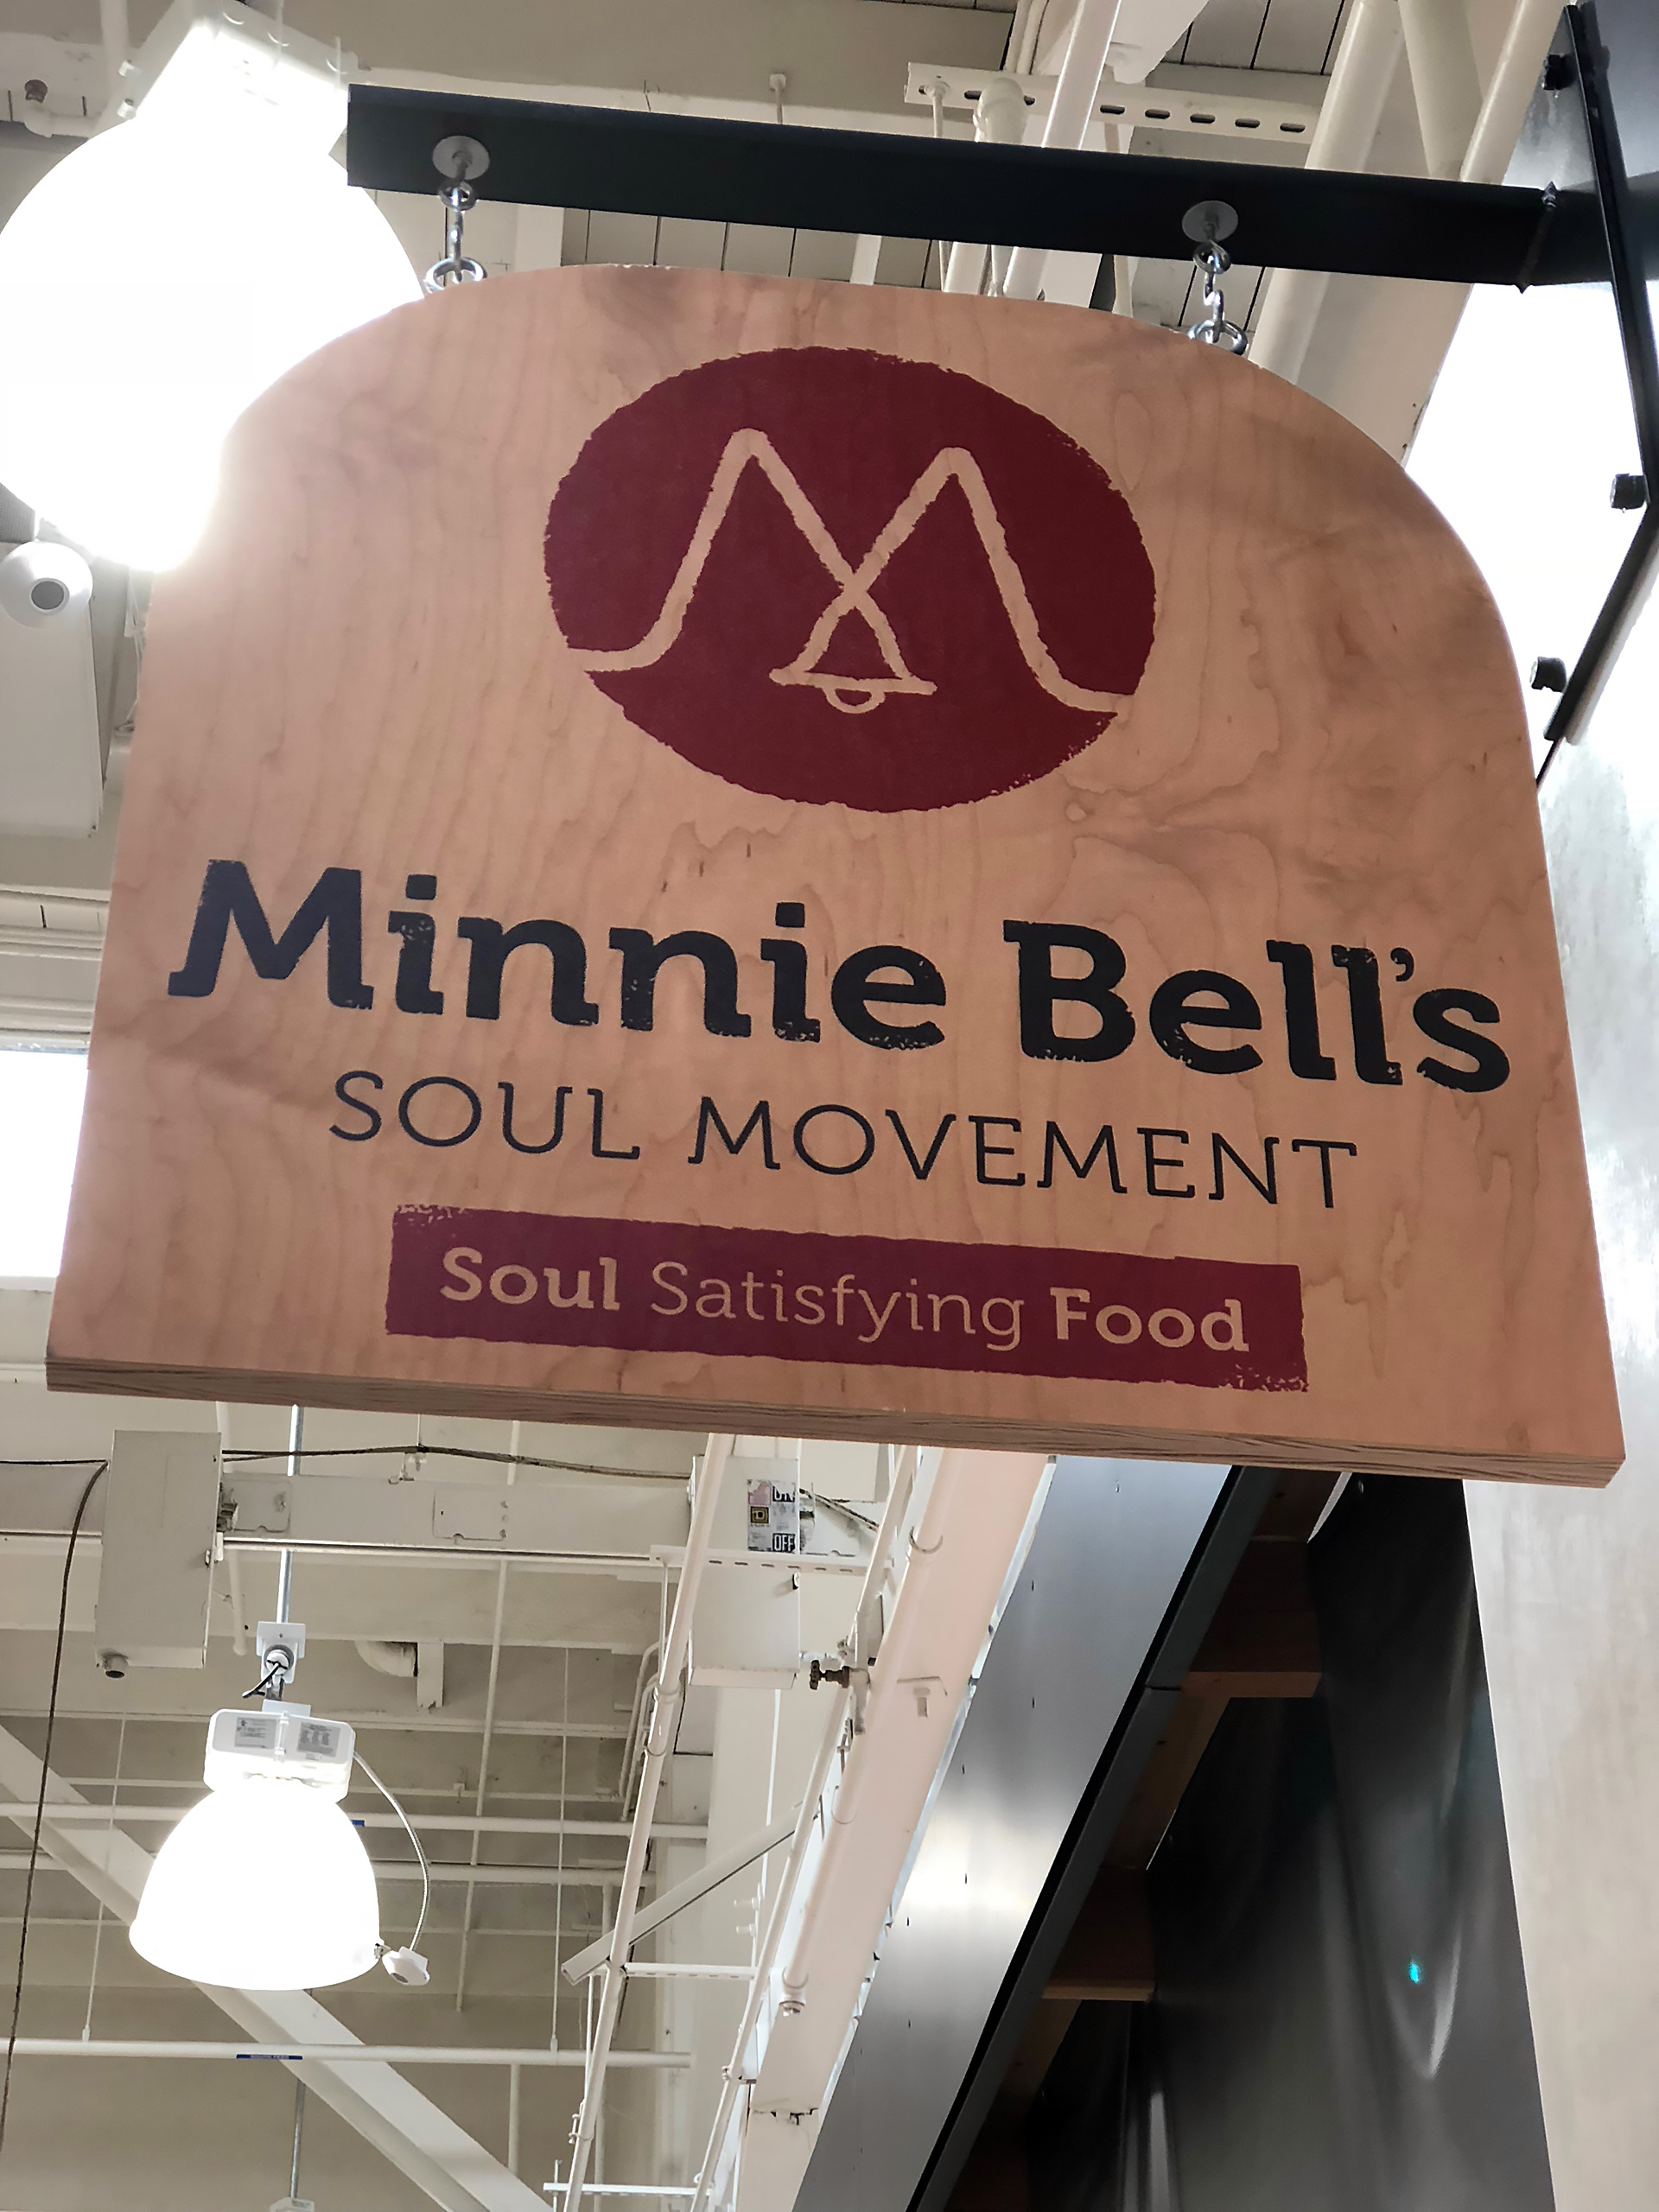 Signage for Minnie Bell's Soul Movement.